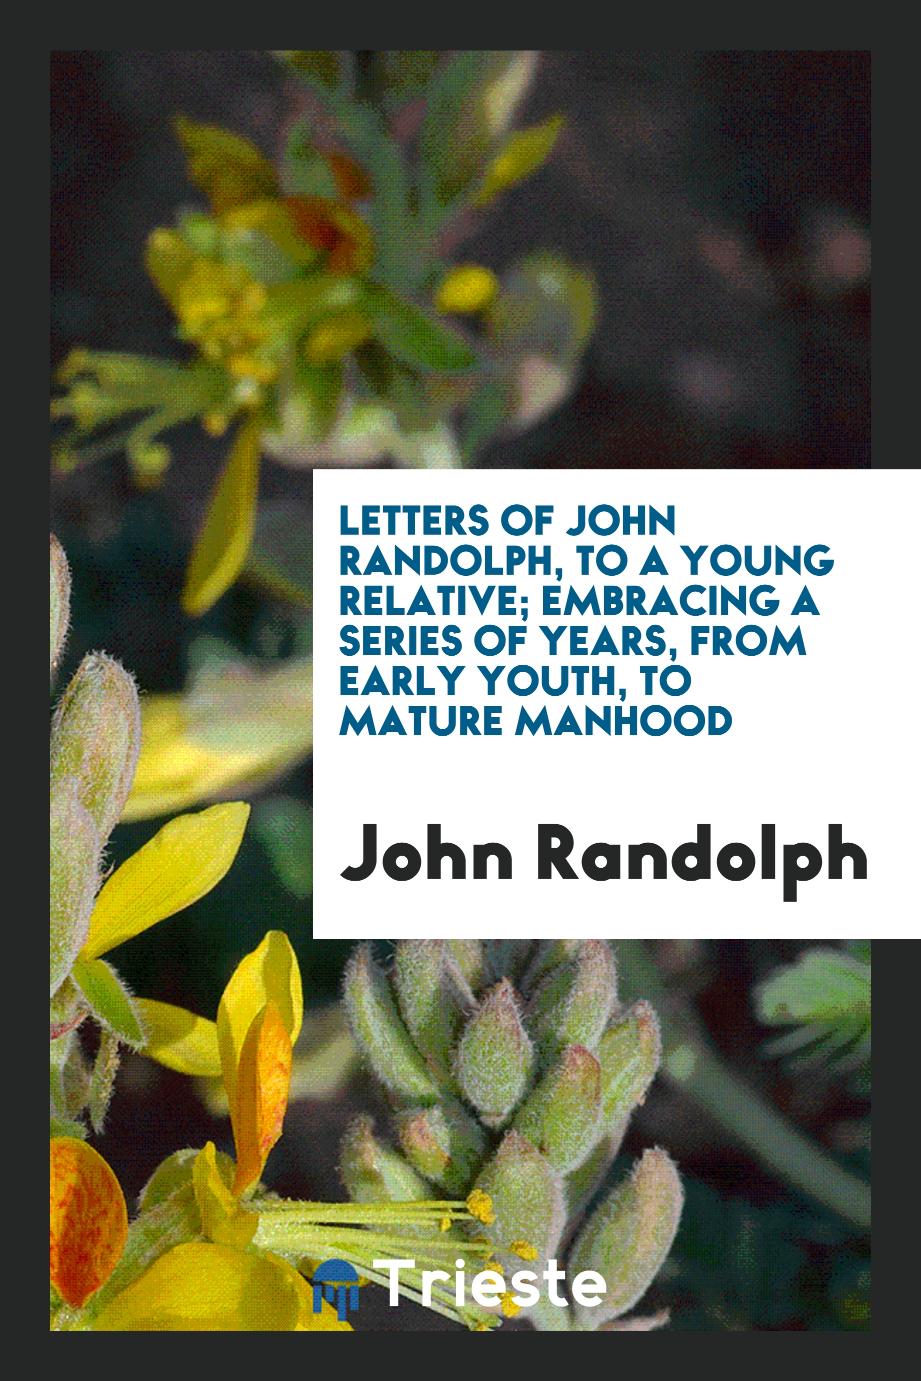 Letters of John Randolph, to a young relative; embracing a series of years, from early youth, to mature manhood